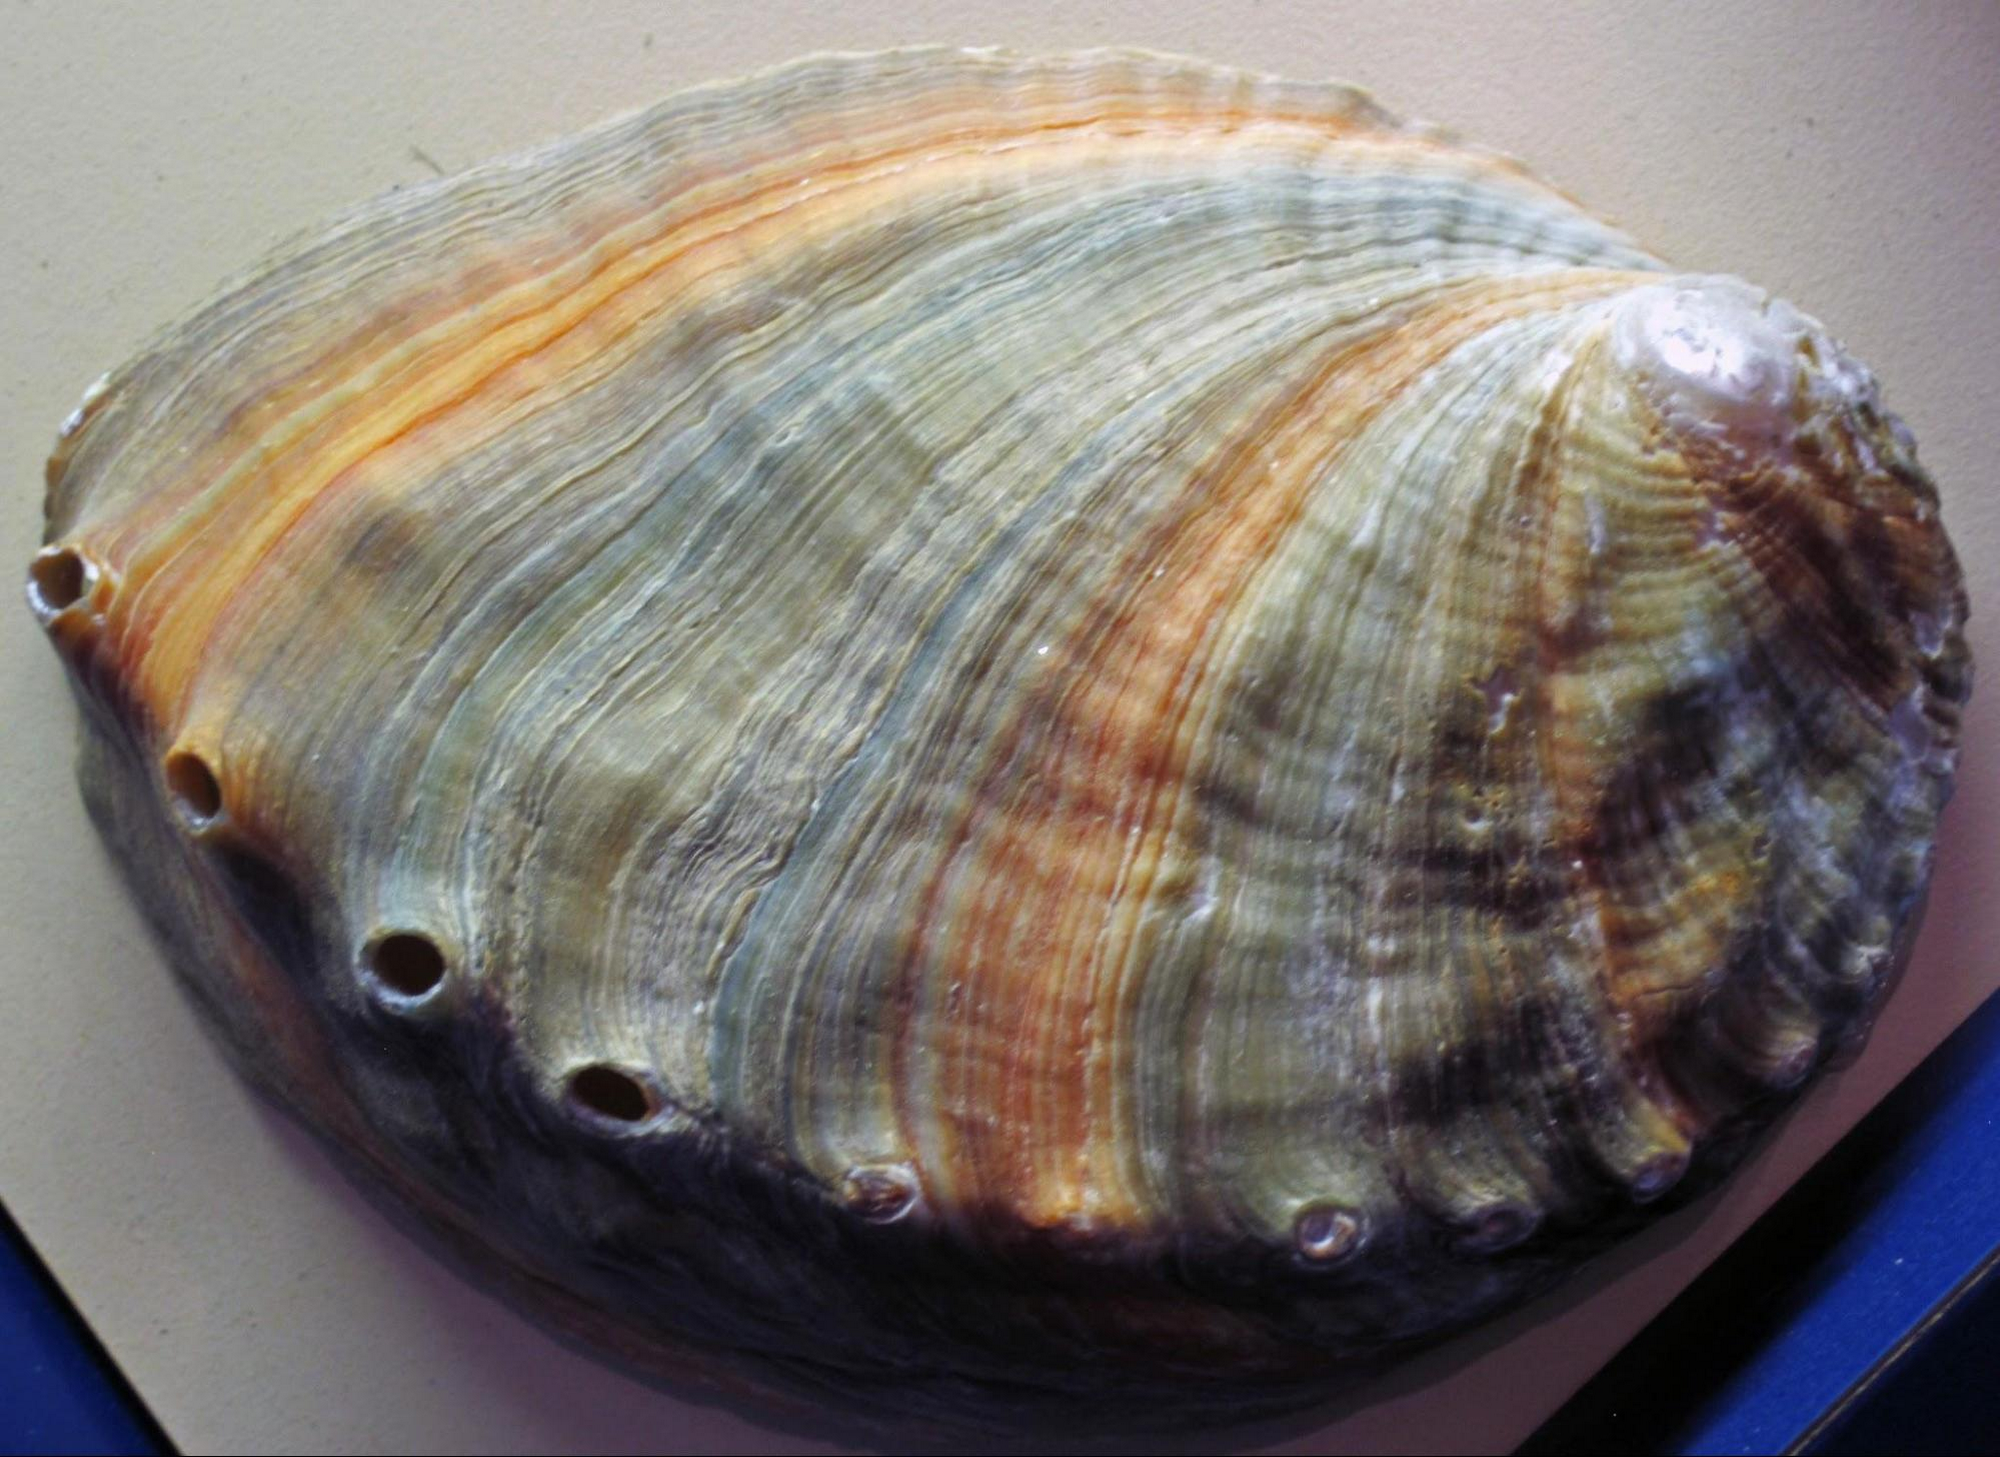 Exterior surface of a disk abalone by James St. John (CC-BY-2.0)